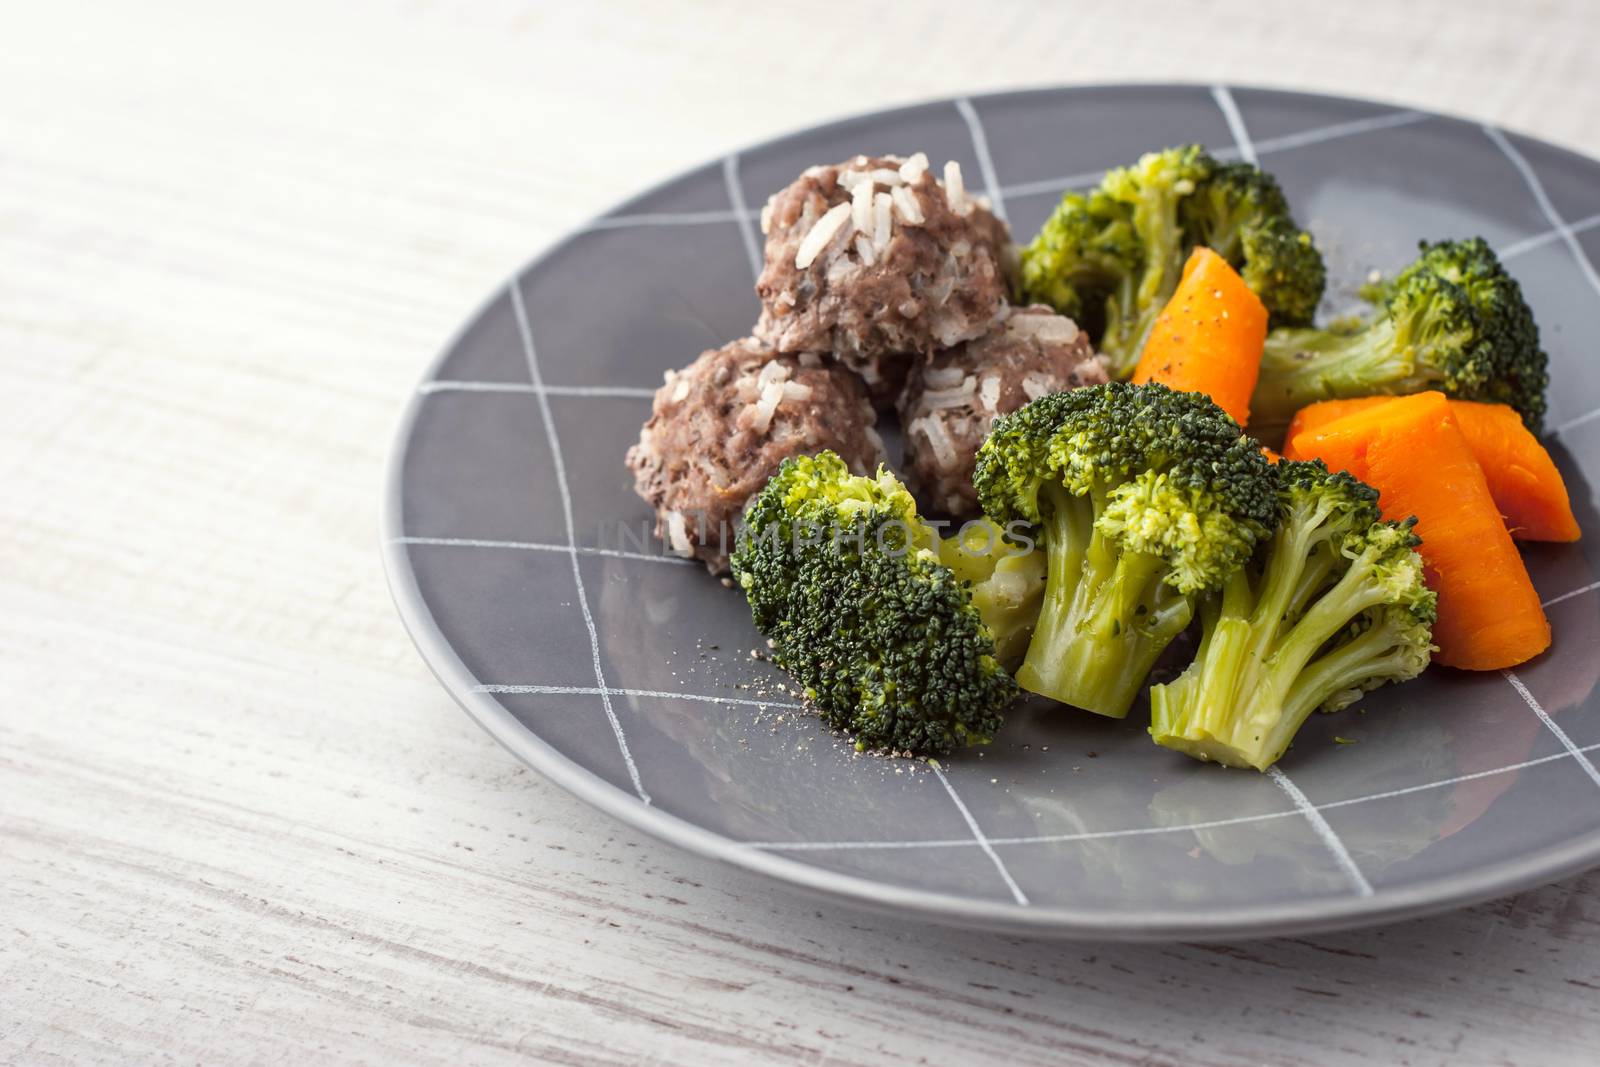 Carrots and broccoli with meatballs on the grey plate horizontal